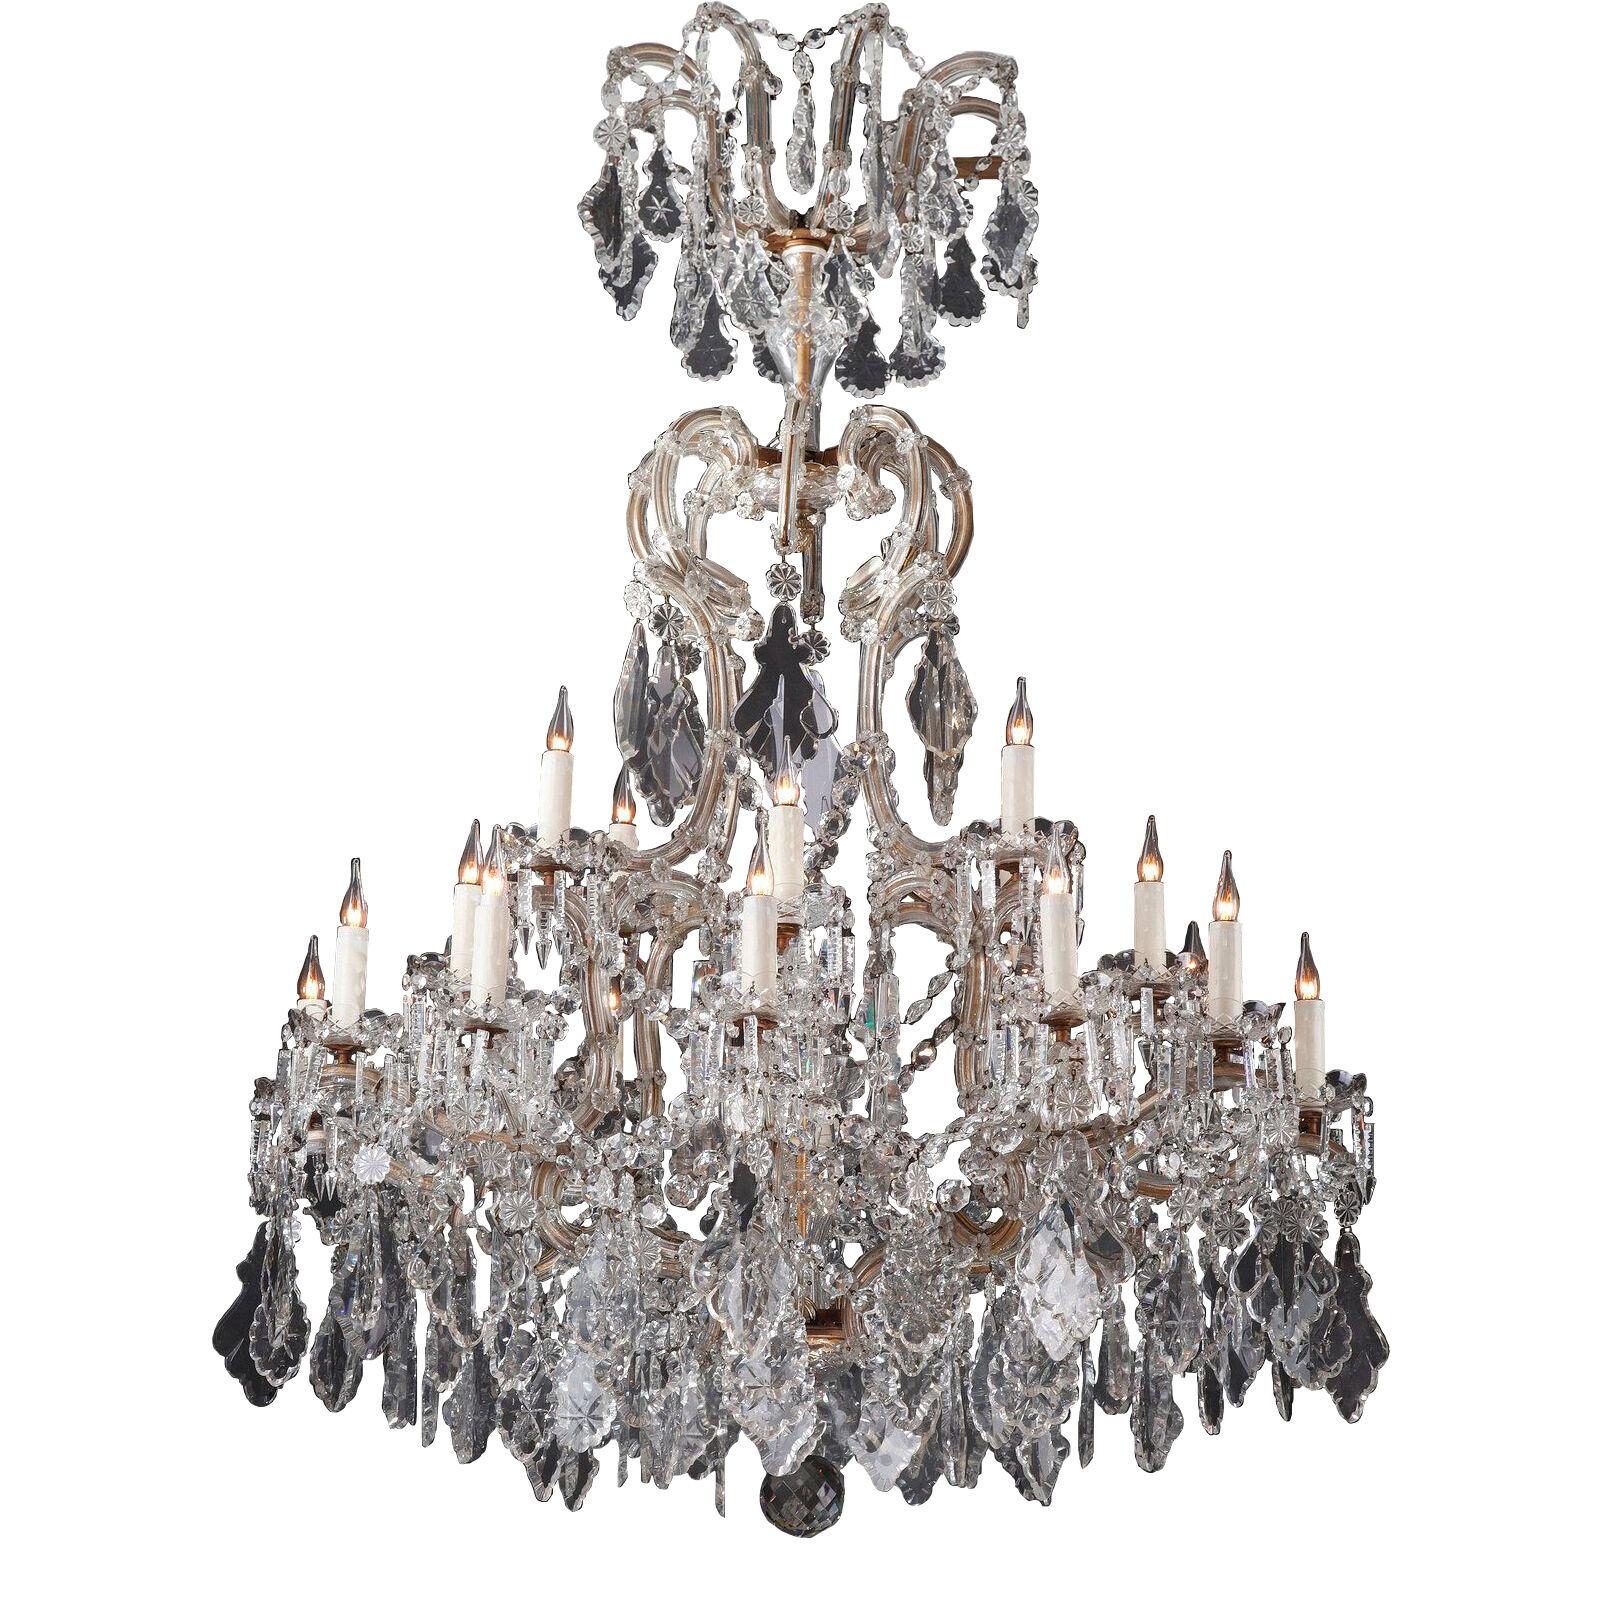 Large Crystal Chandelier, 20th century